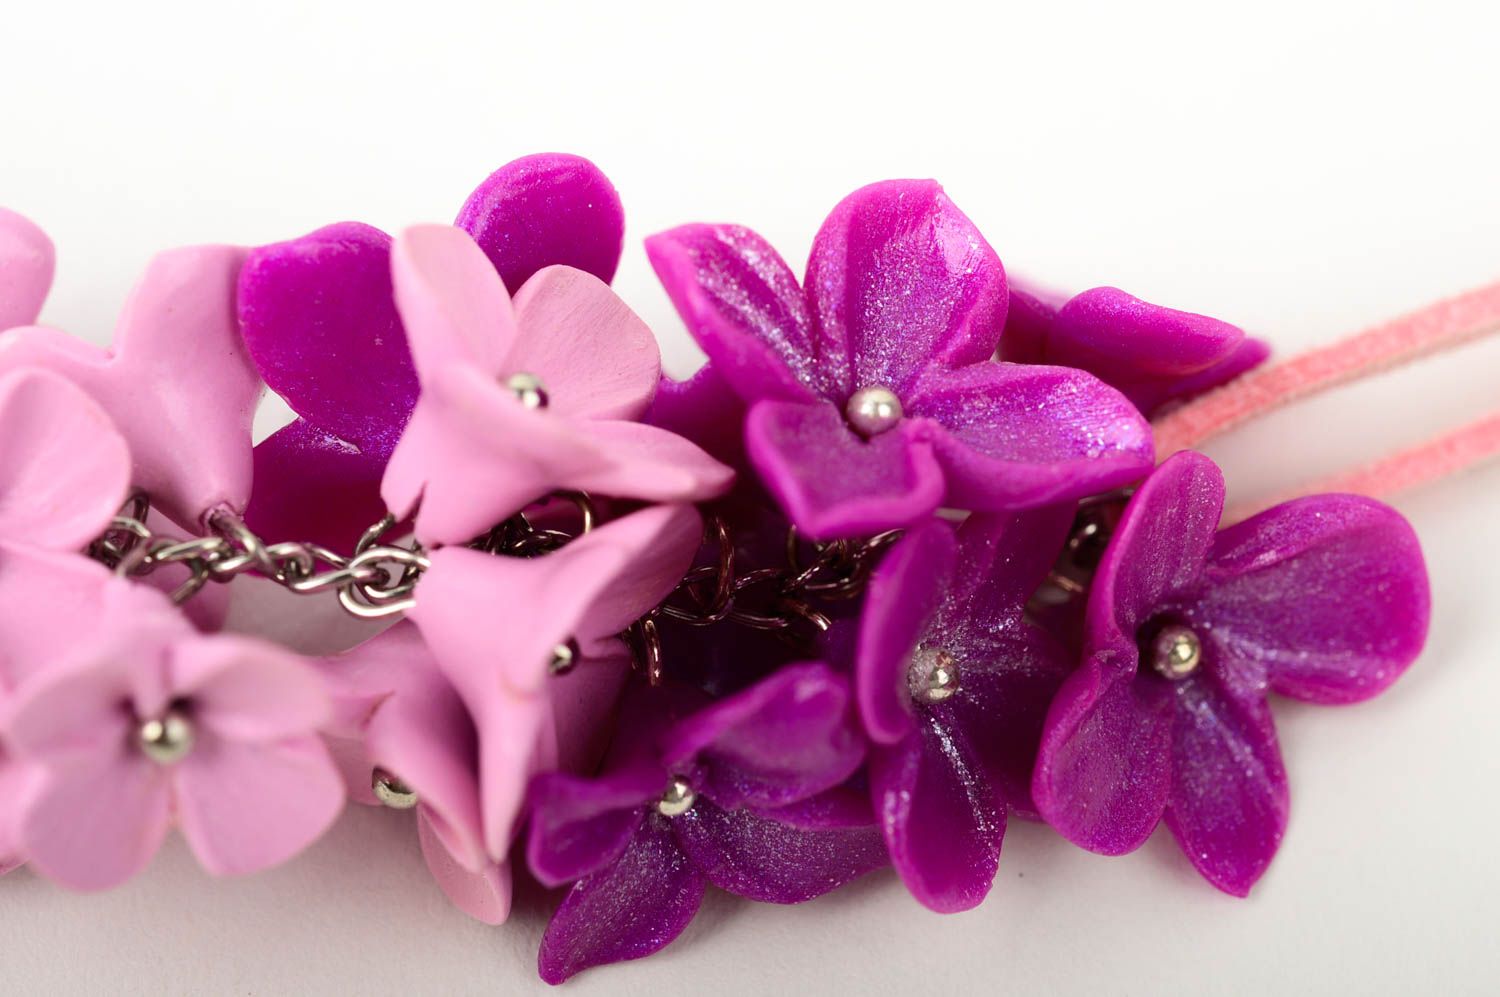 Handmade necklace flower jewelry polymer clay designer accessories cool gifts photo 4